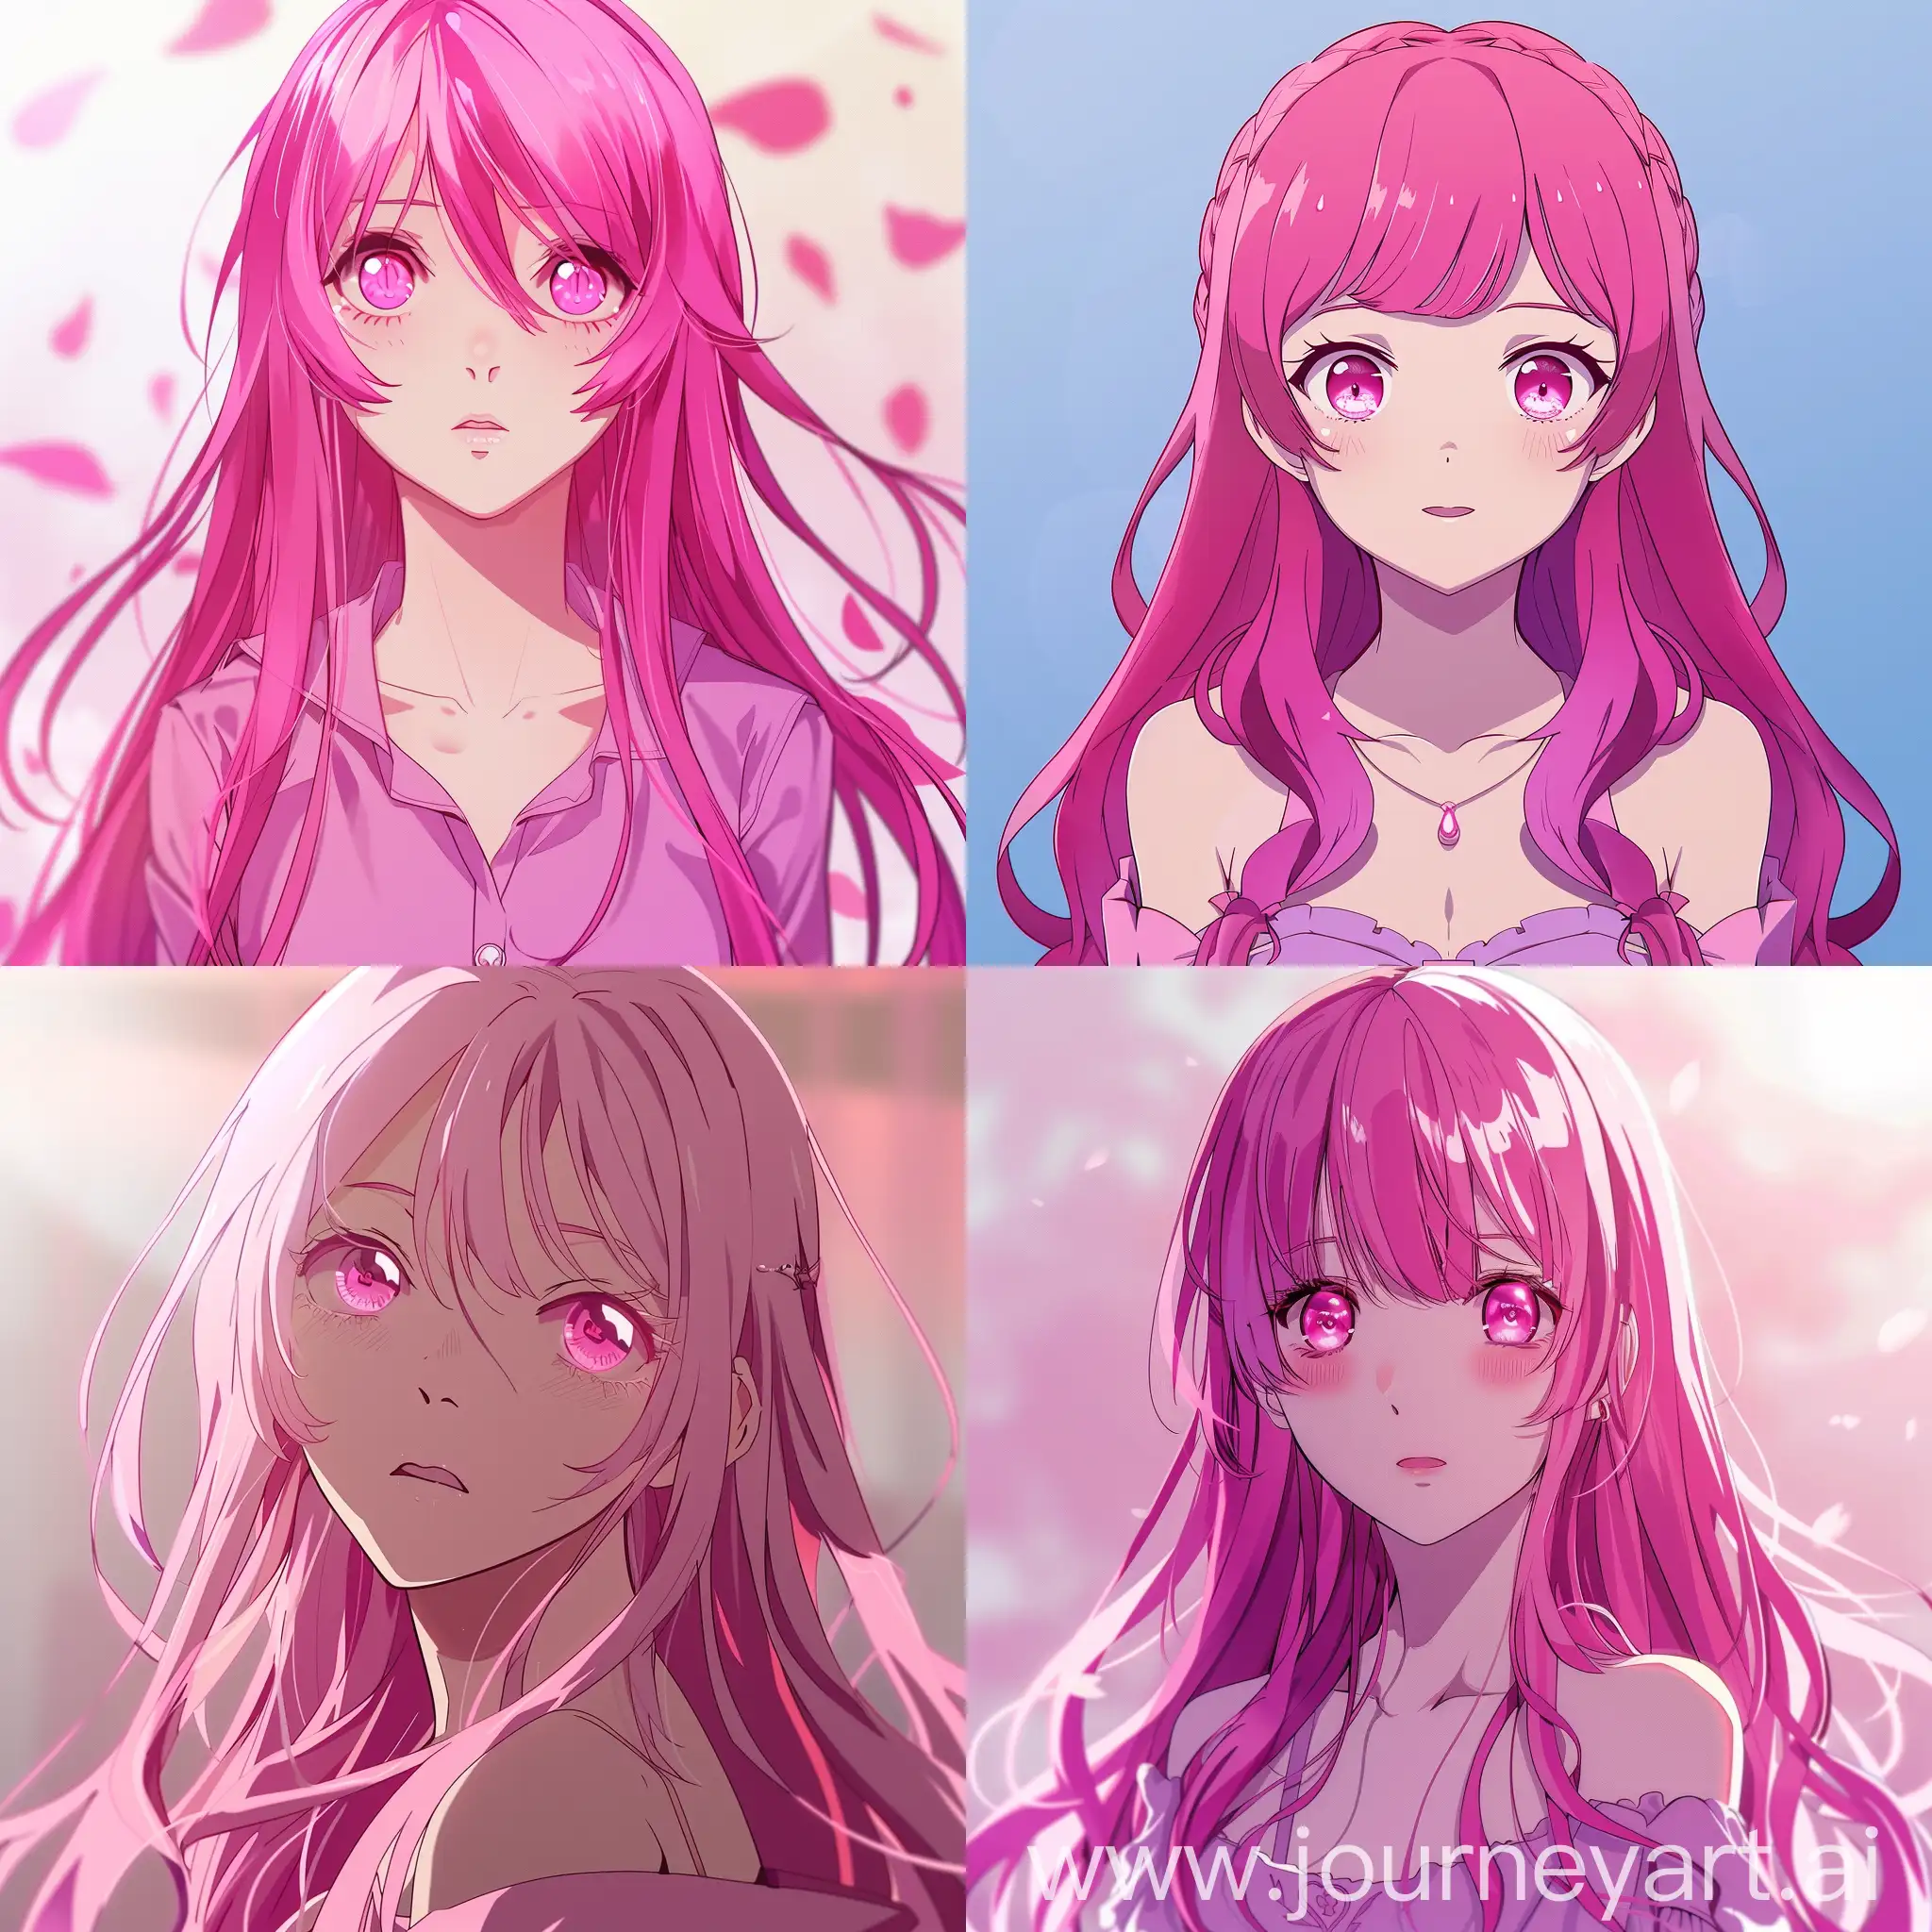 A young woman, pretty face, long pink hair, pink eyes, wearing feminine outfit, wirh background, anime style